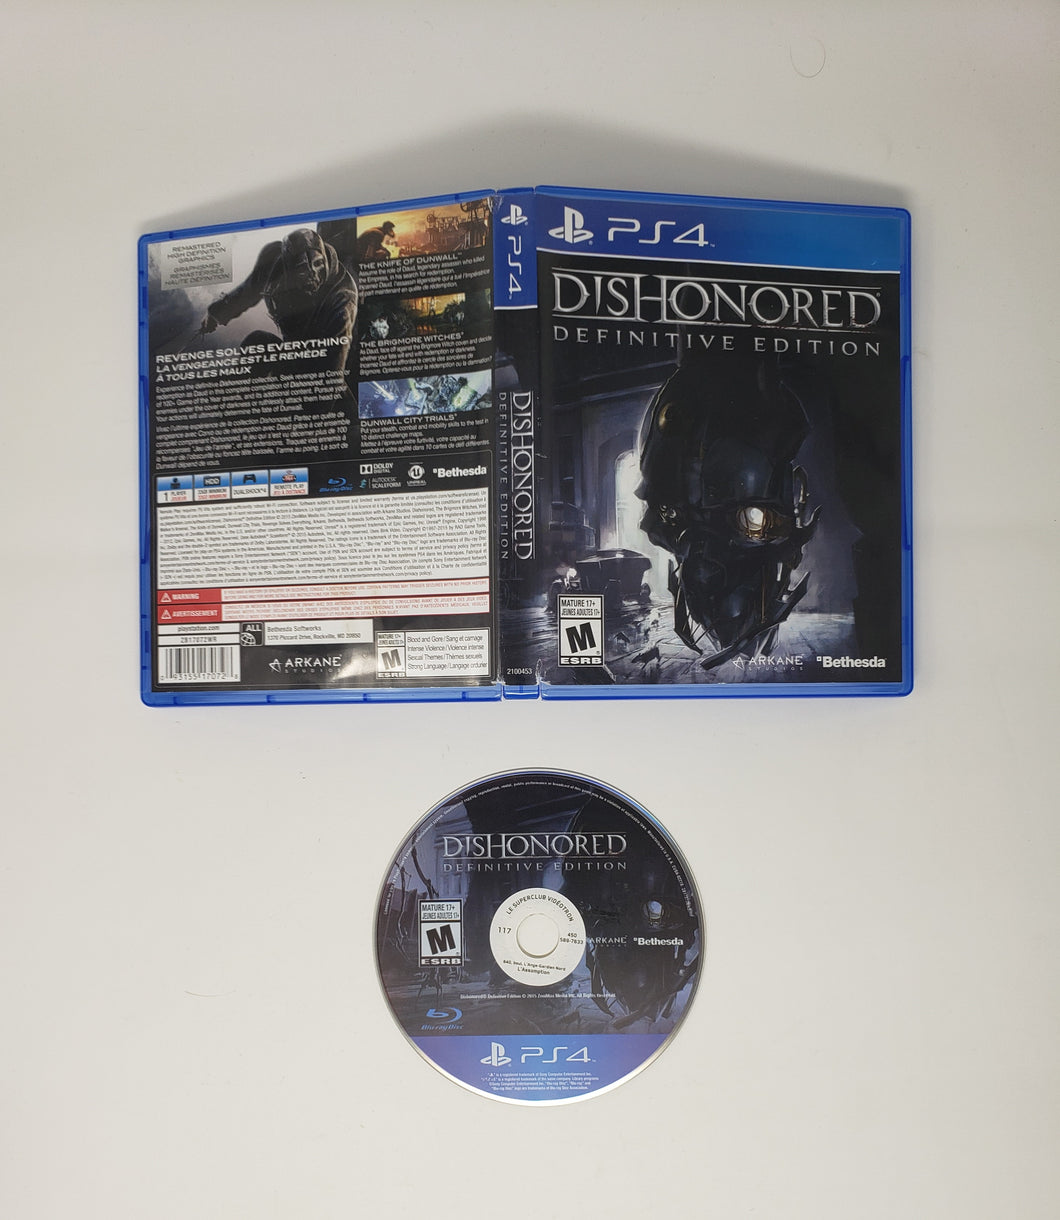 Dishonored [Édition Définitive] - Sony Playstation 4 | PS4